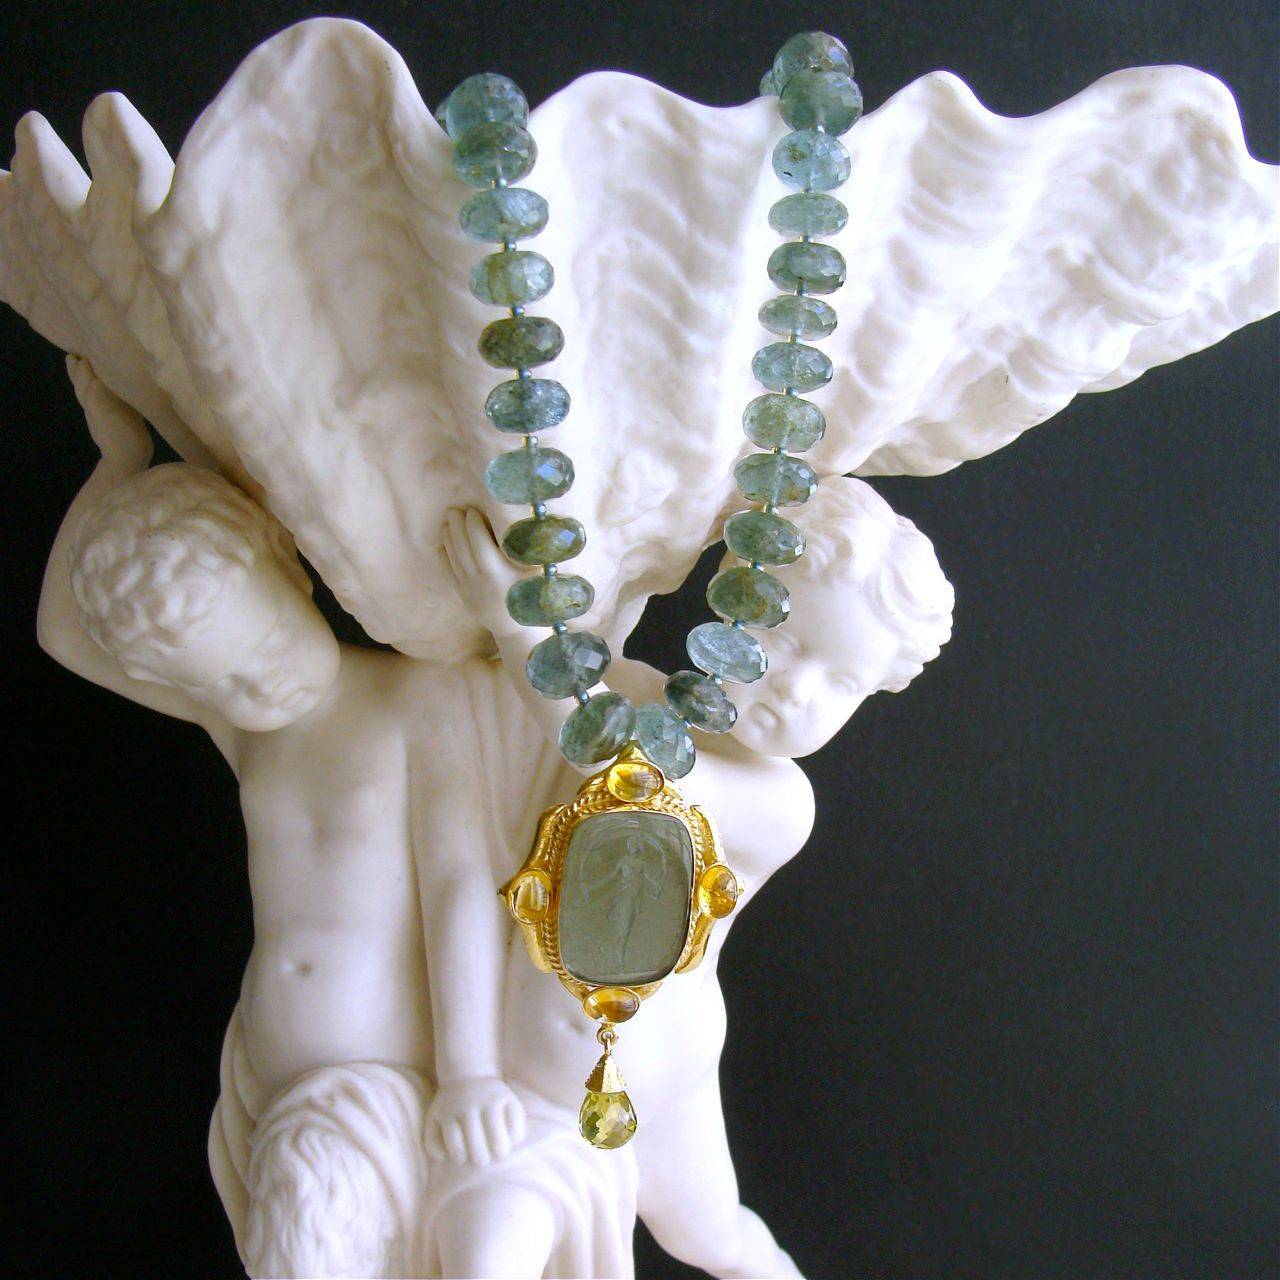 Lissone Necklace.

Stunning moss green sapphire rondelles in shades of loden green and dusty aqua have been married to a beautiful Venetian glass intaglio of a goddess with gossamer dress.  The gold vermeil setting of the intaglio has been